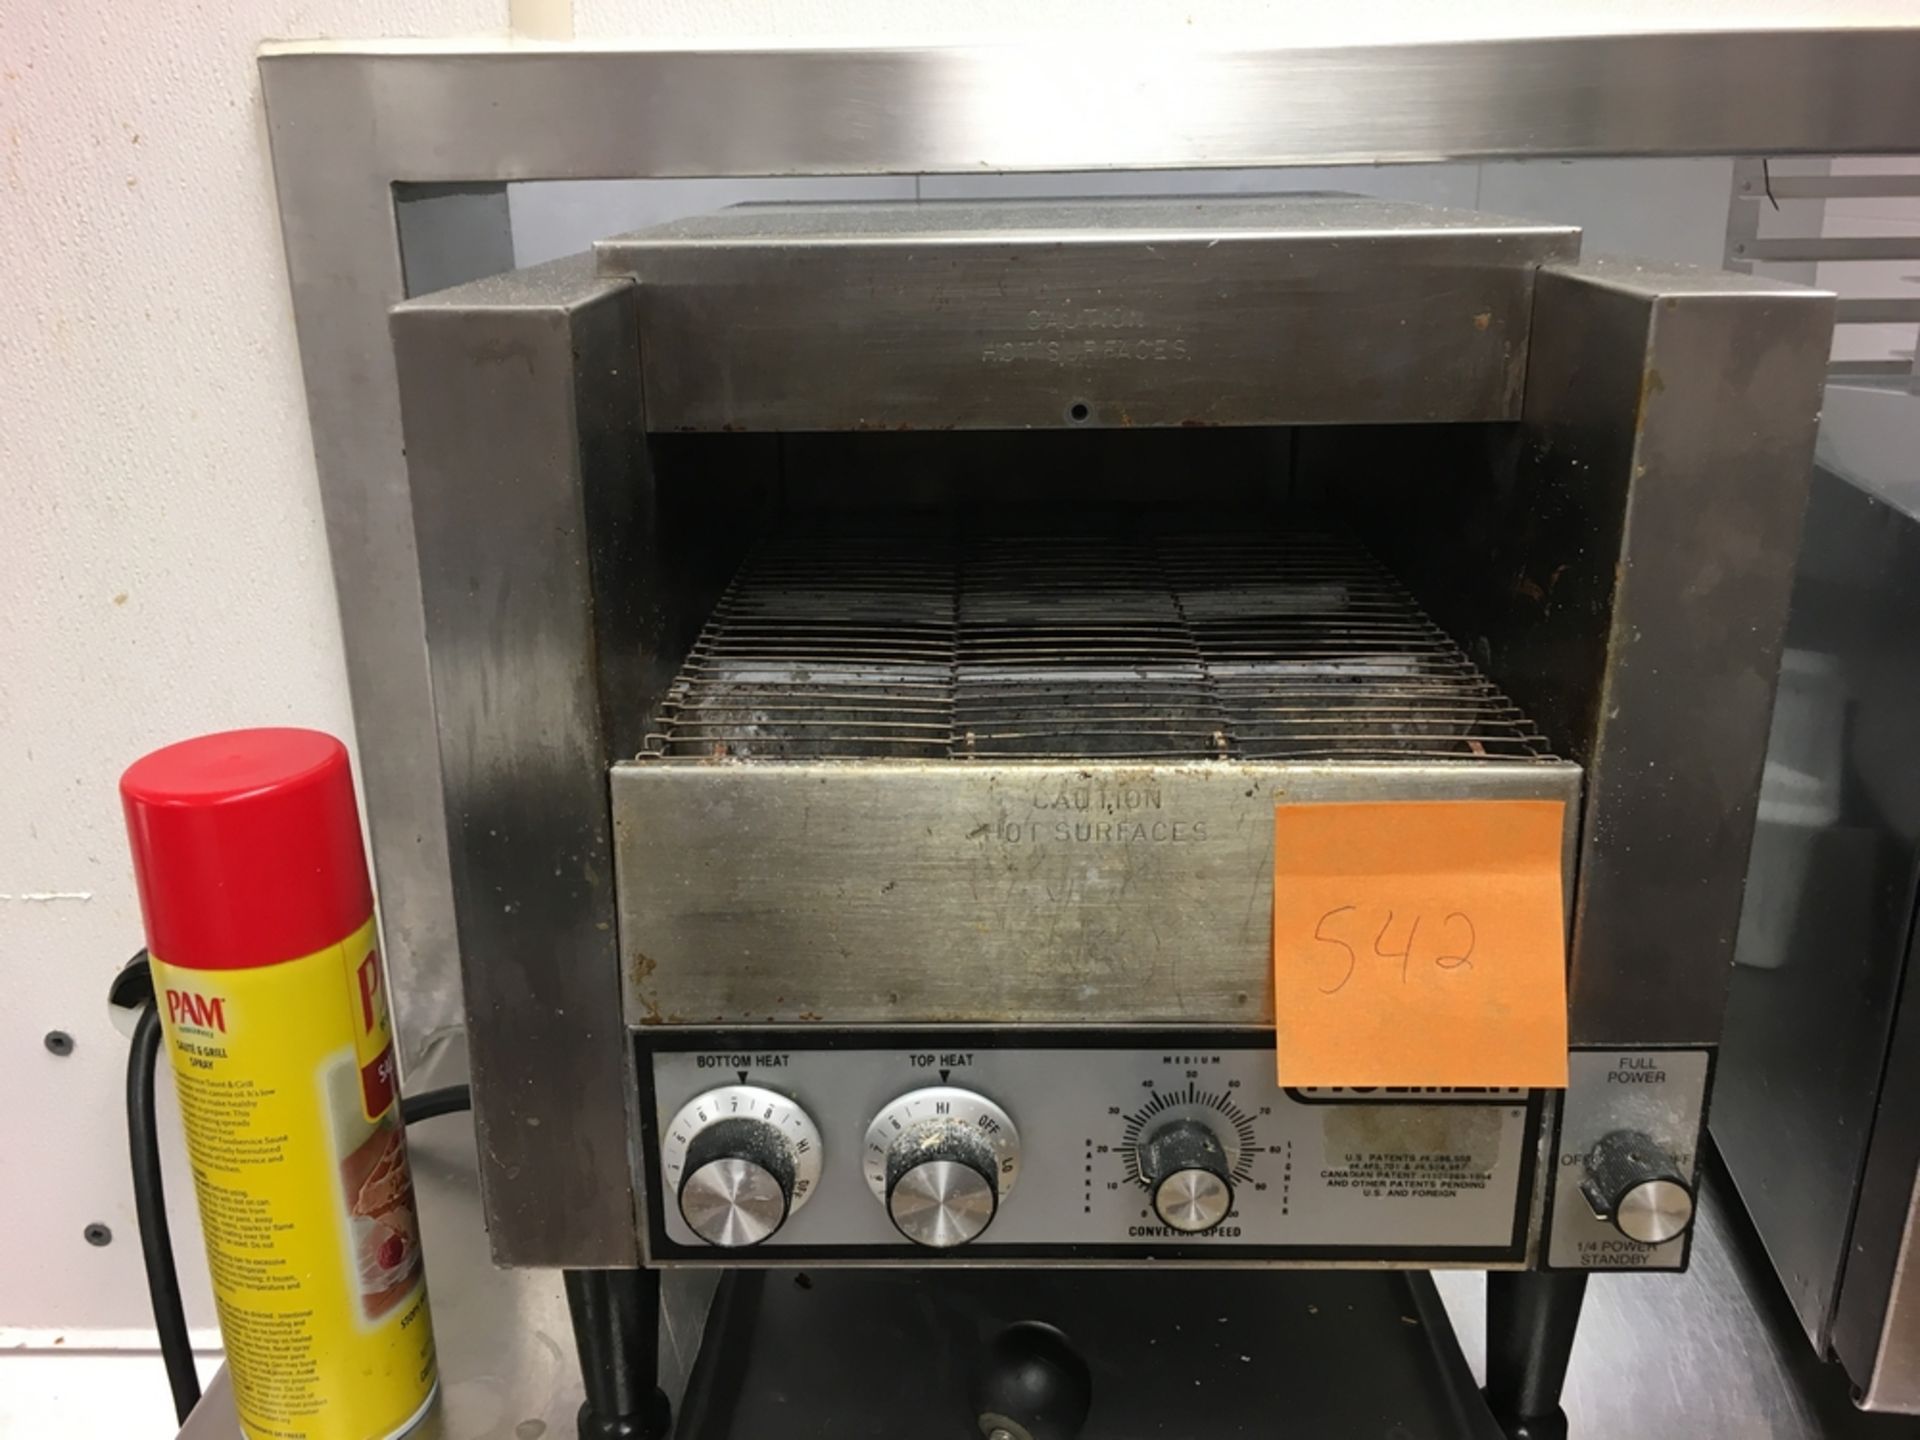 SS Toaster Oven Located: Main Kitchen, adjacent to Palace Grill Asset #: 12976 ***NOTE from